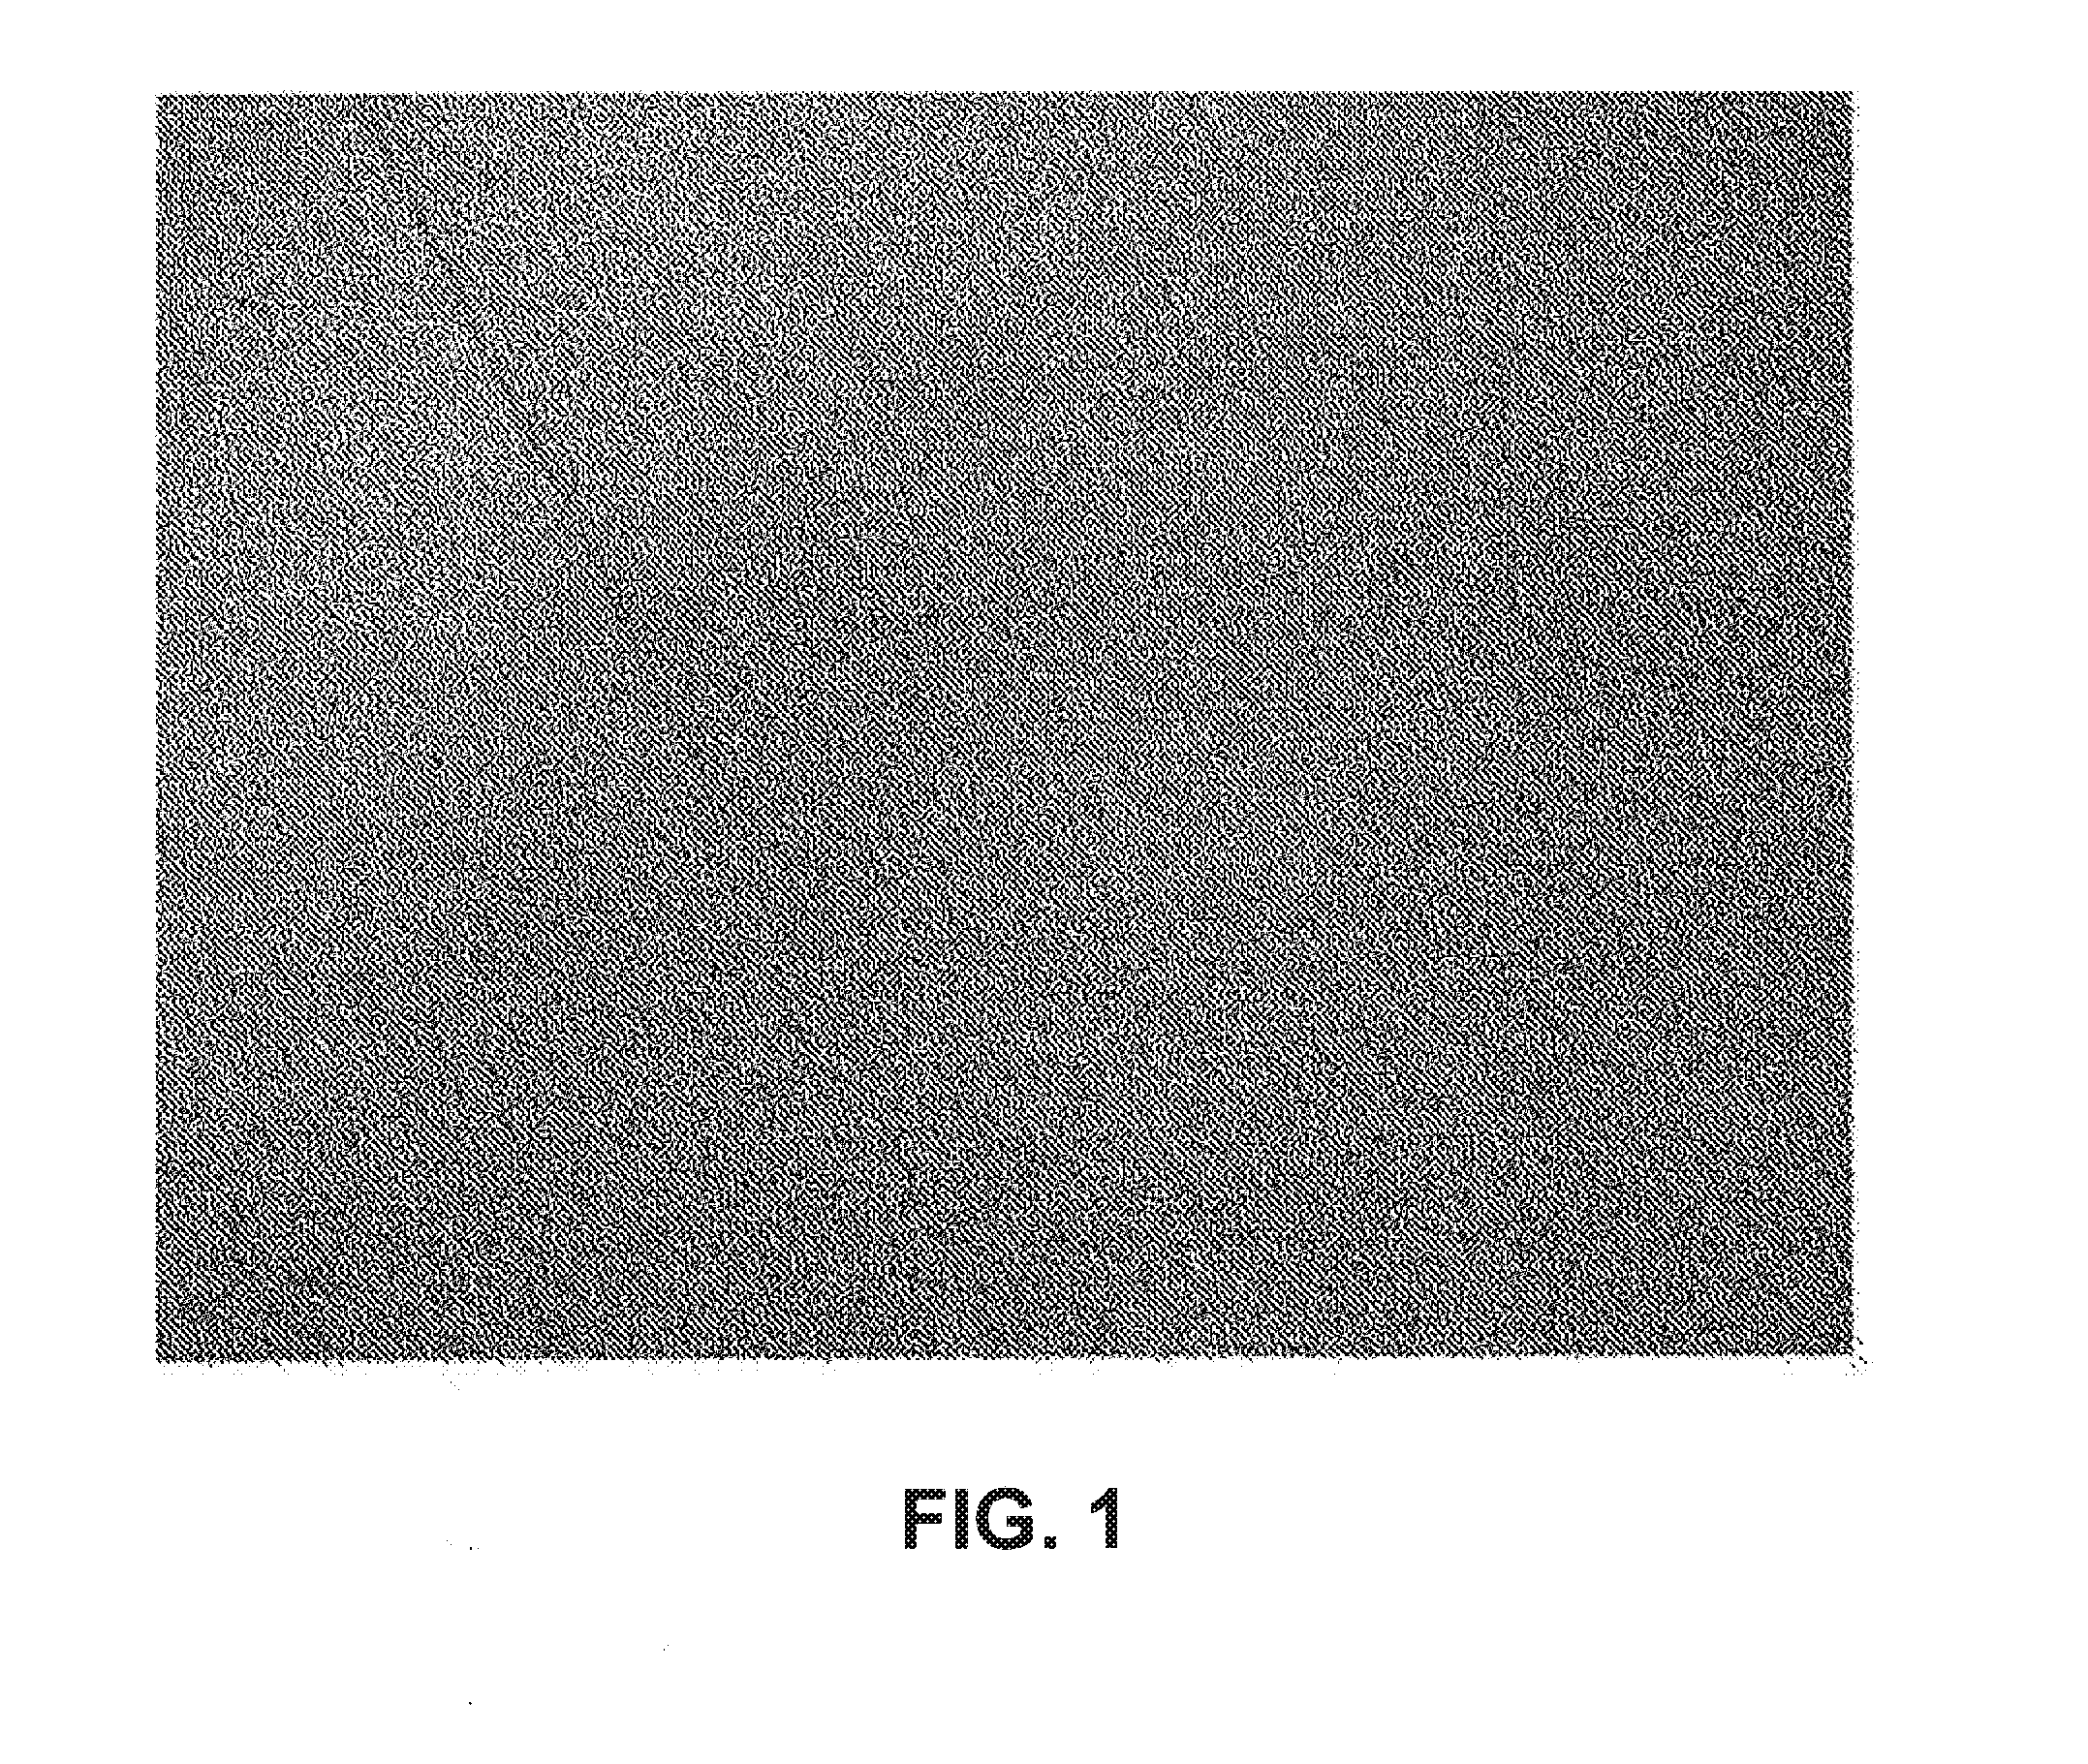 Composition of polypropylene having improved tactility and scratch resistance and methods of use thereof